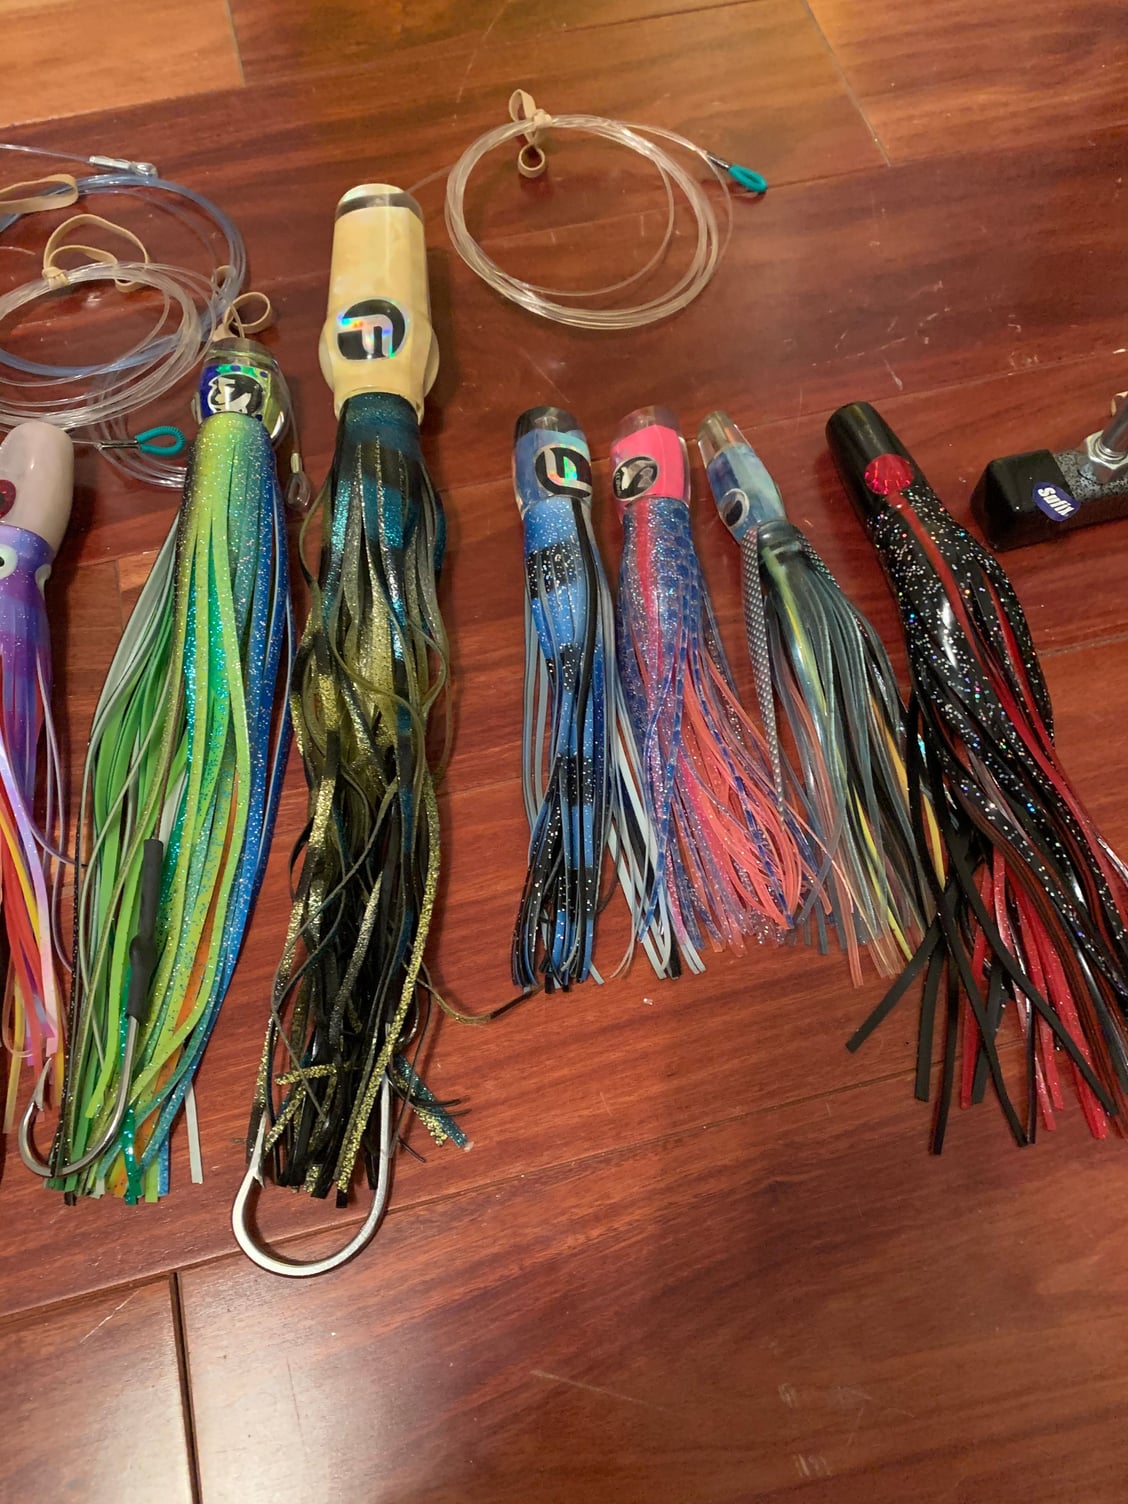 New Marlin/Tuna Lures SOLD! - The Hull Truth - Boating and Fishing Forum